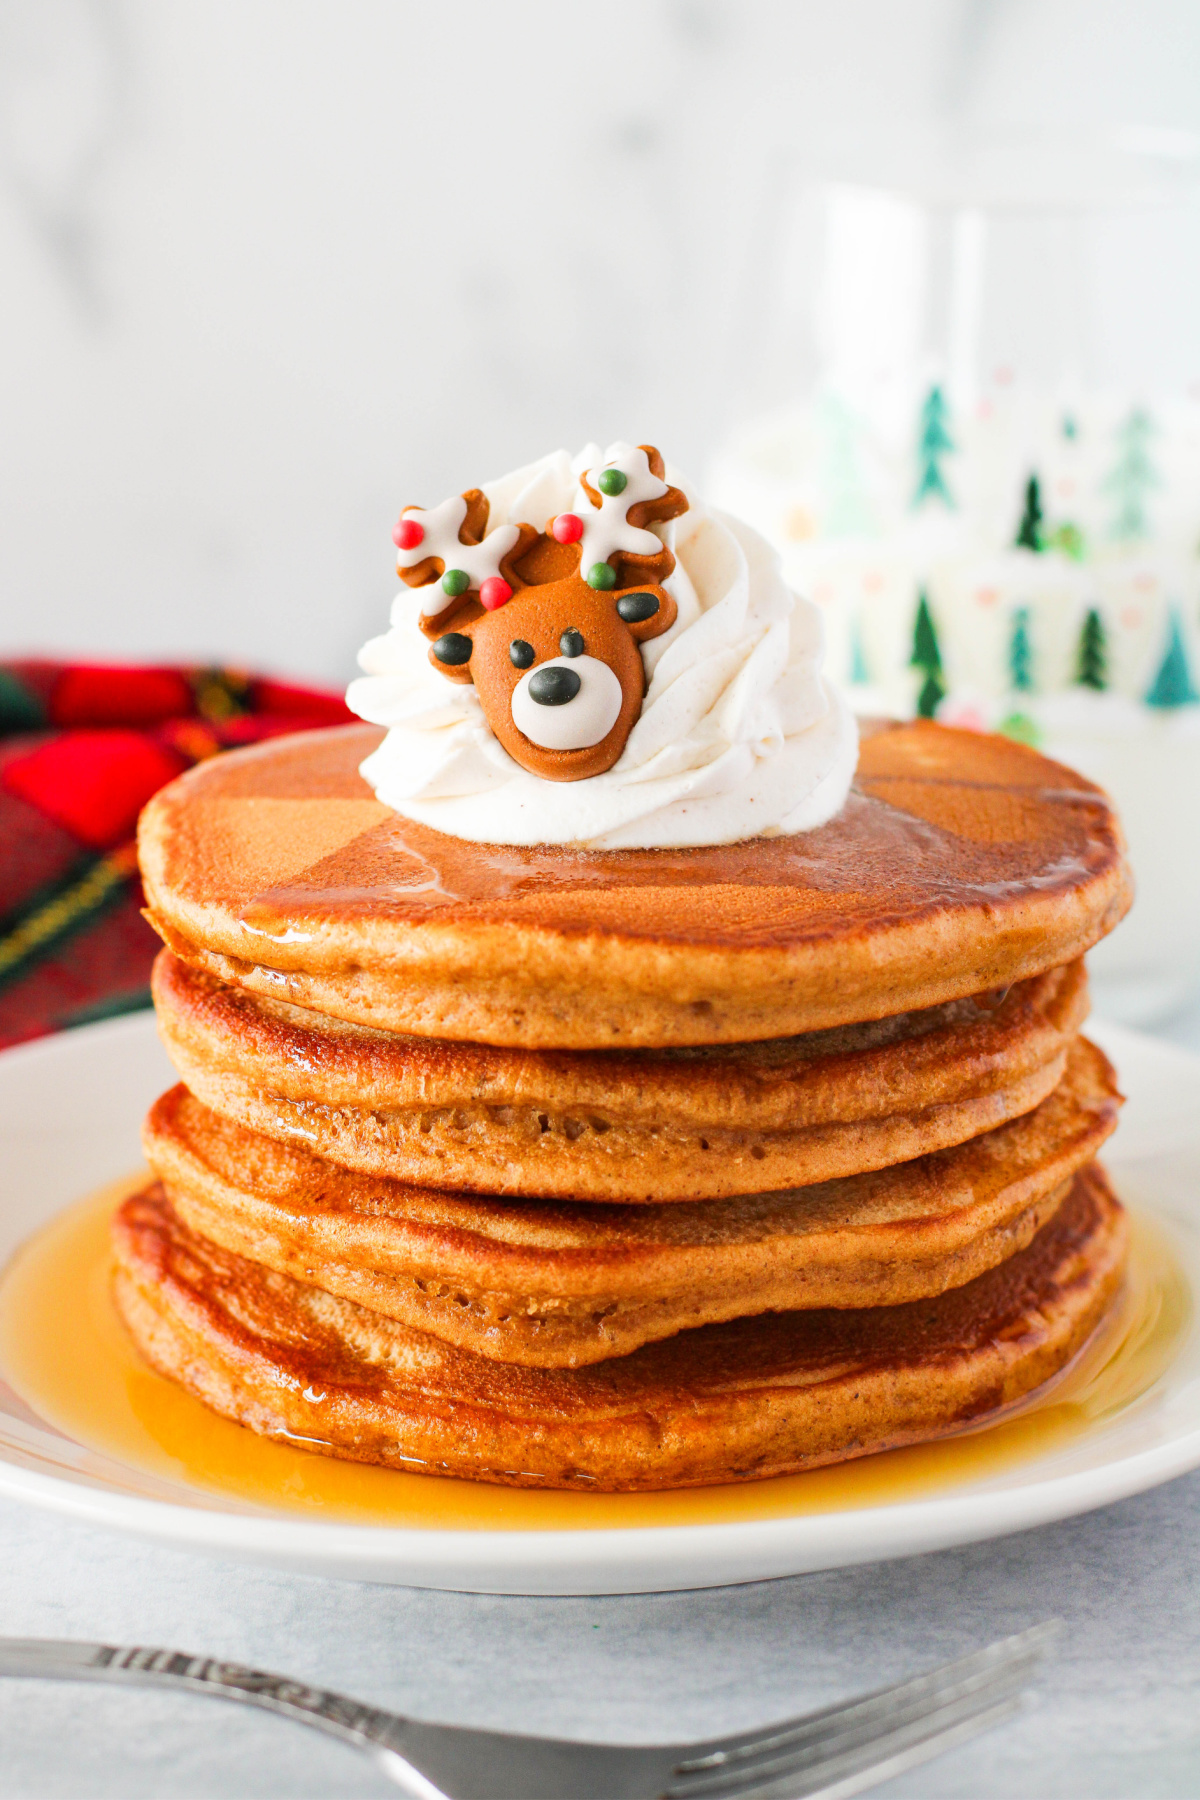 A stack of pancakes with whipped cream and reindeer decorations.